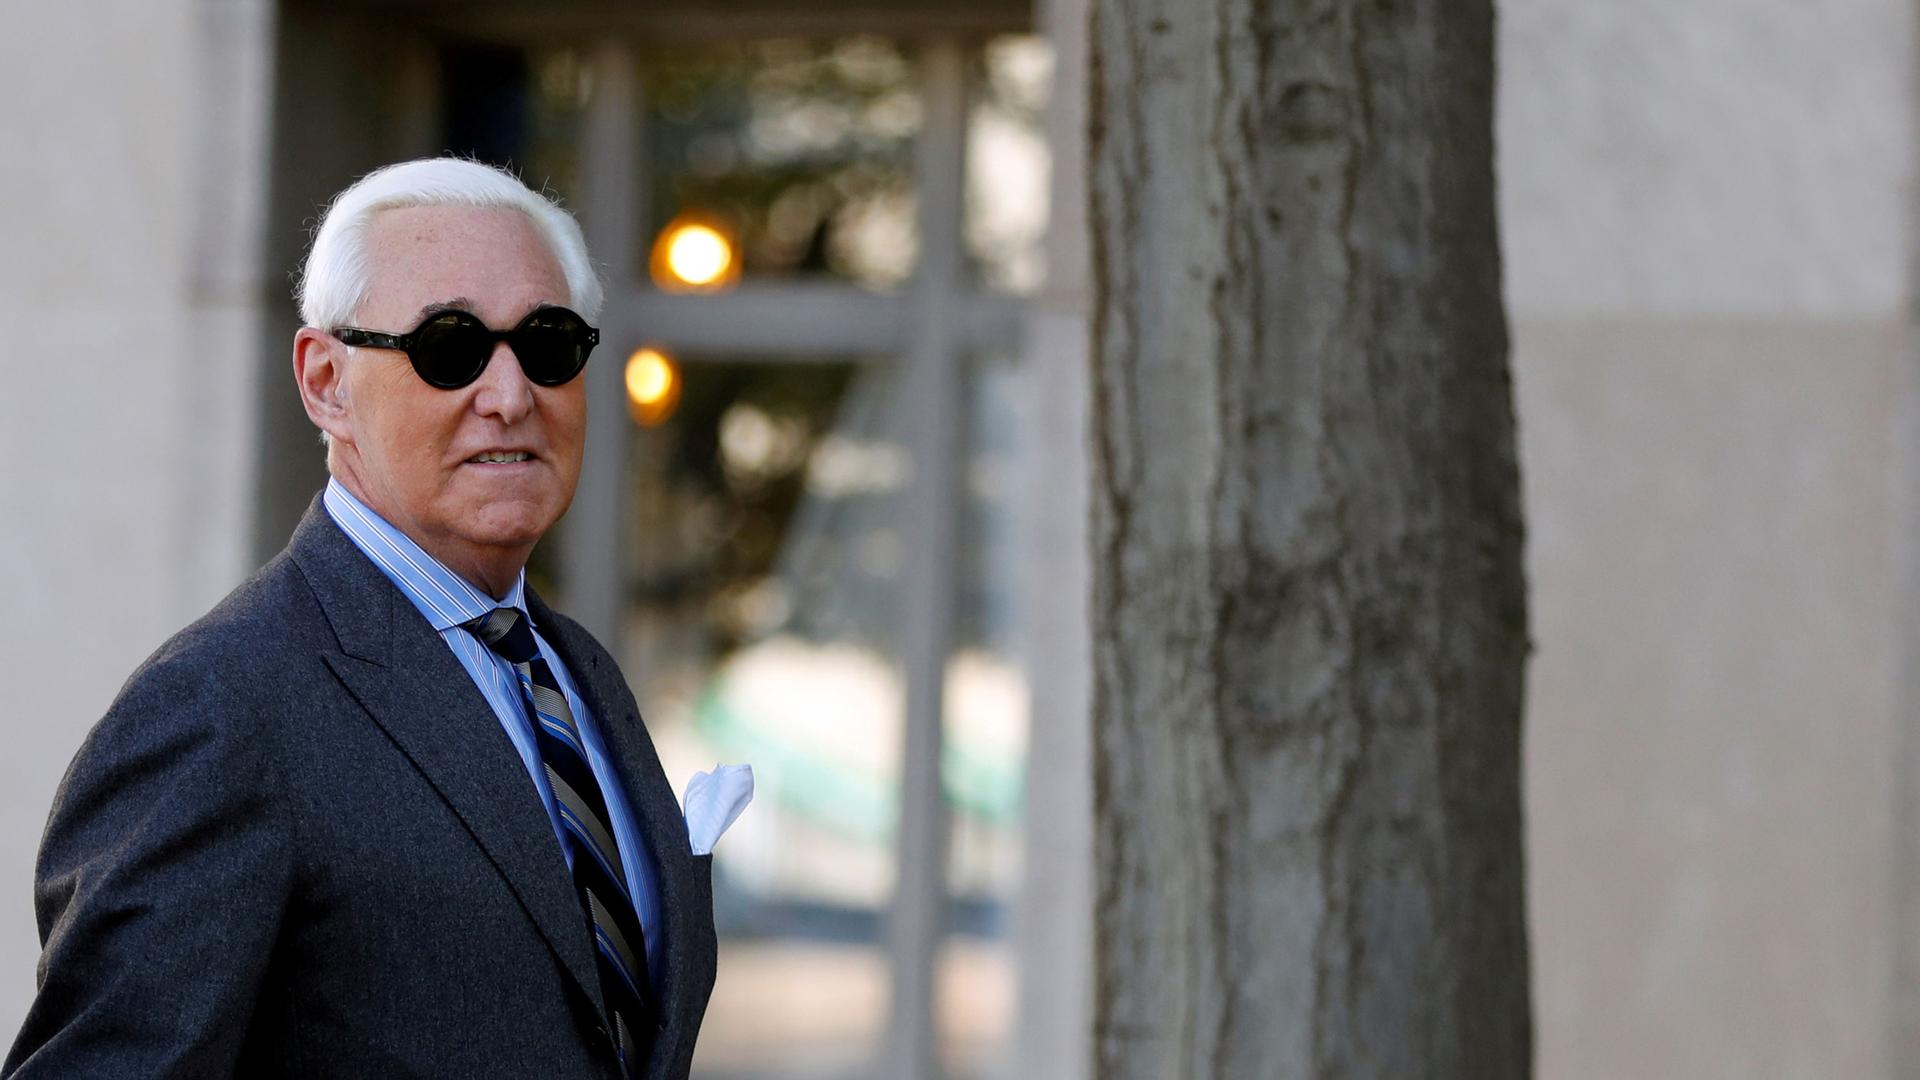 Roger Stone is shown wearing a grey suit and striped tie and dark circular sun glasses.